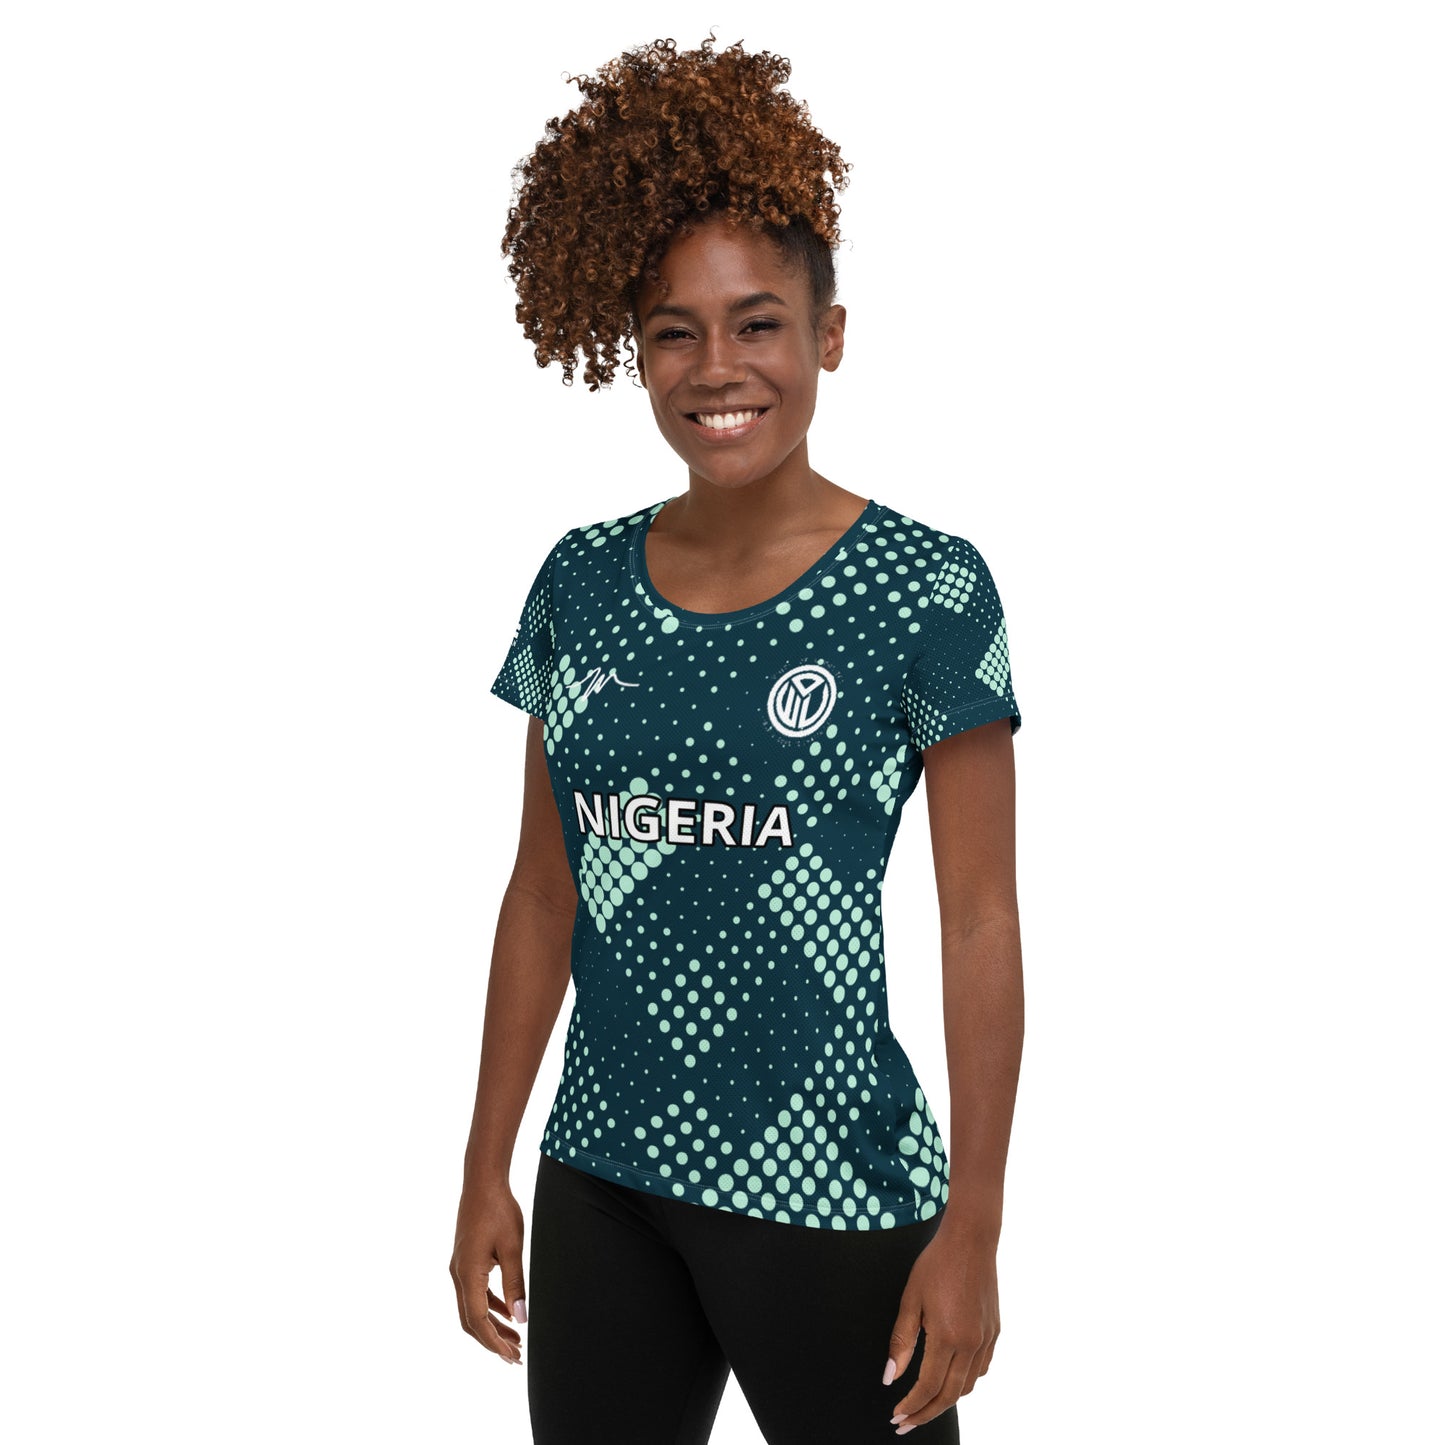 NIGERIA All-Over Print Women's Athletic T-shirt